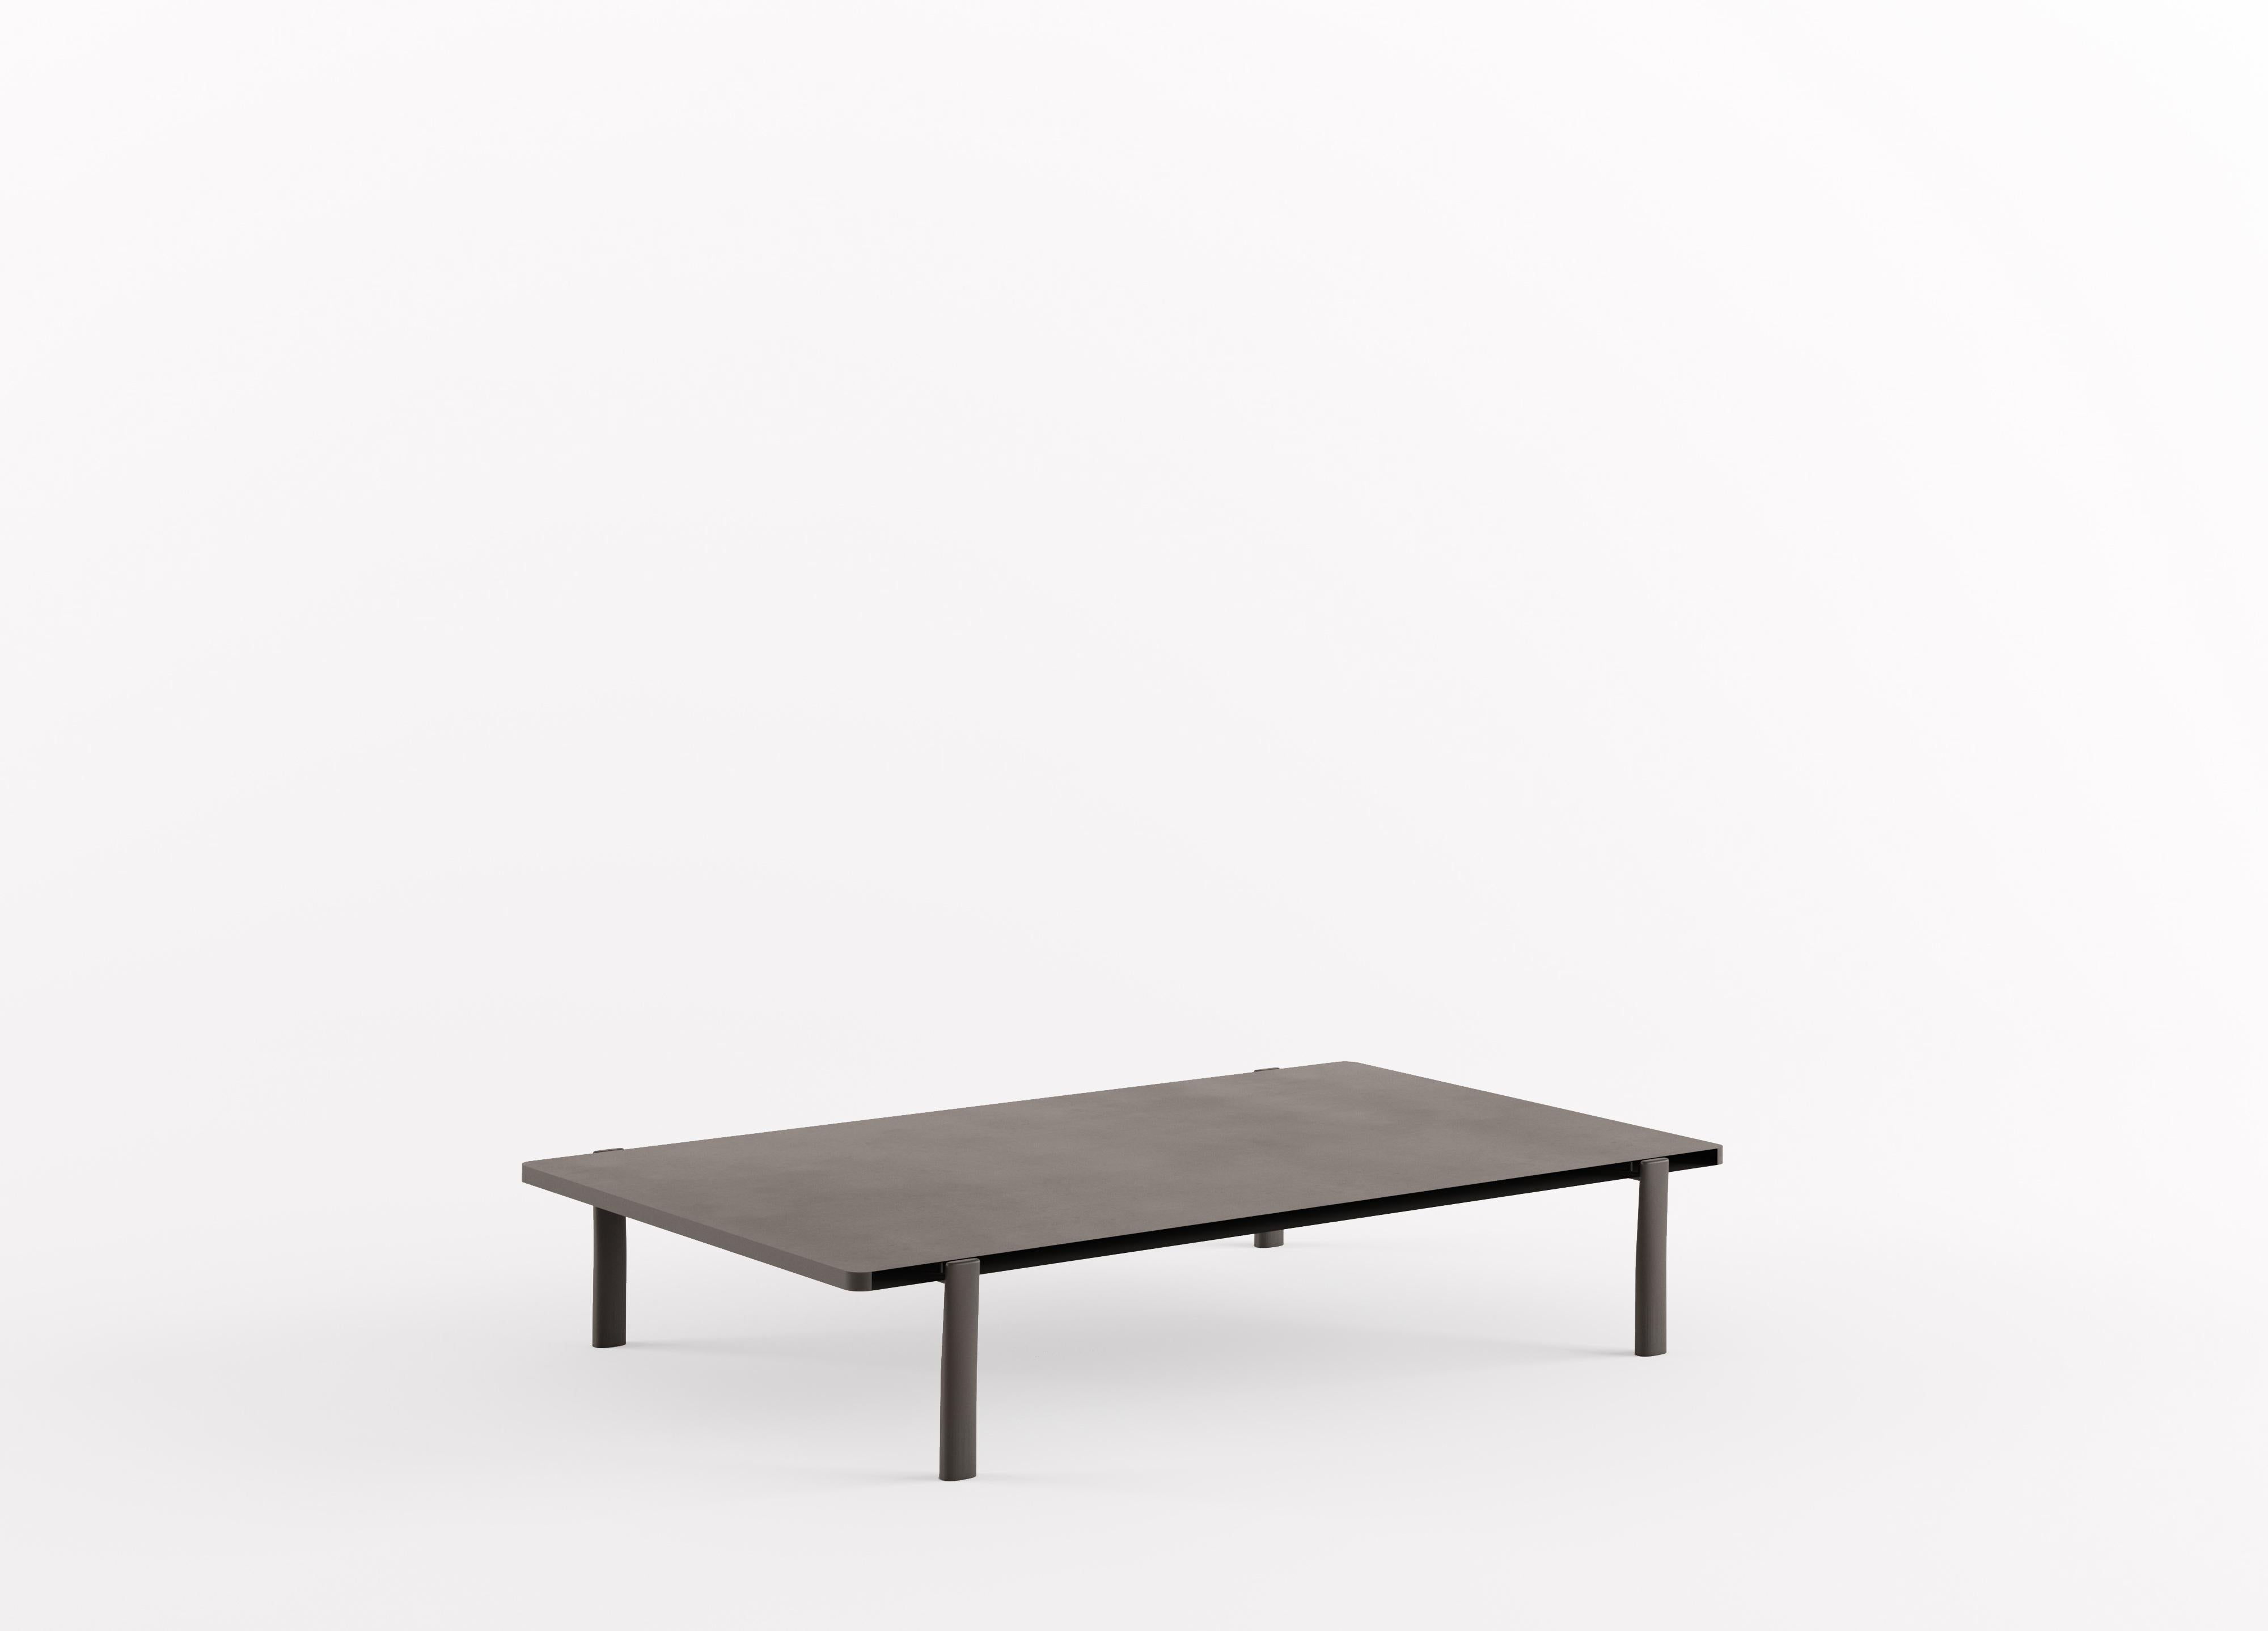 Alias 955 Eleven Low Table Singular Rectangle w Grey Color MDF & Lacquered Frame by PearsonLloyd

Coffee table with round or rectangular lacquered MDF top; structure composed of lacquered or polished aluminium legs.

Tom Lloyd and Luke Pearson